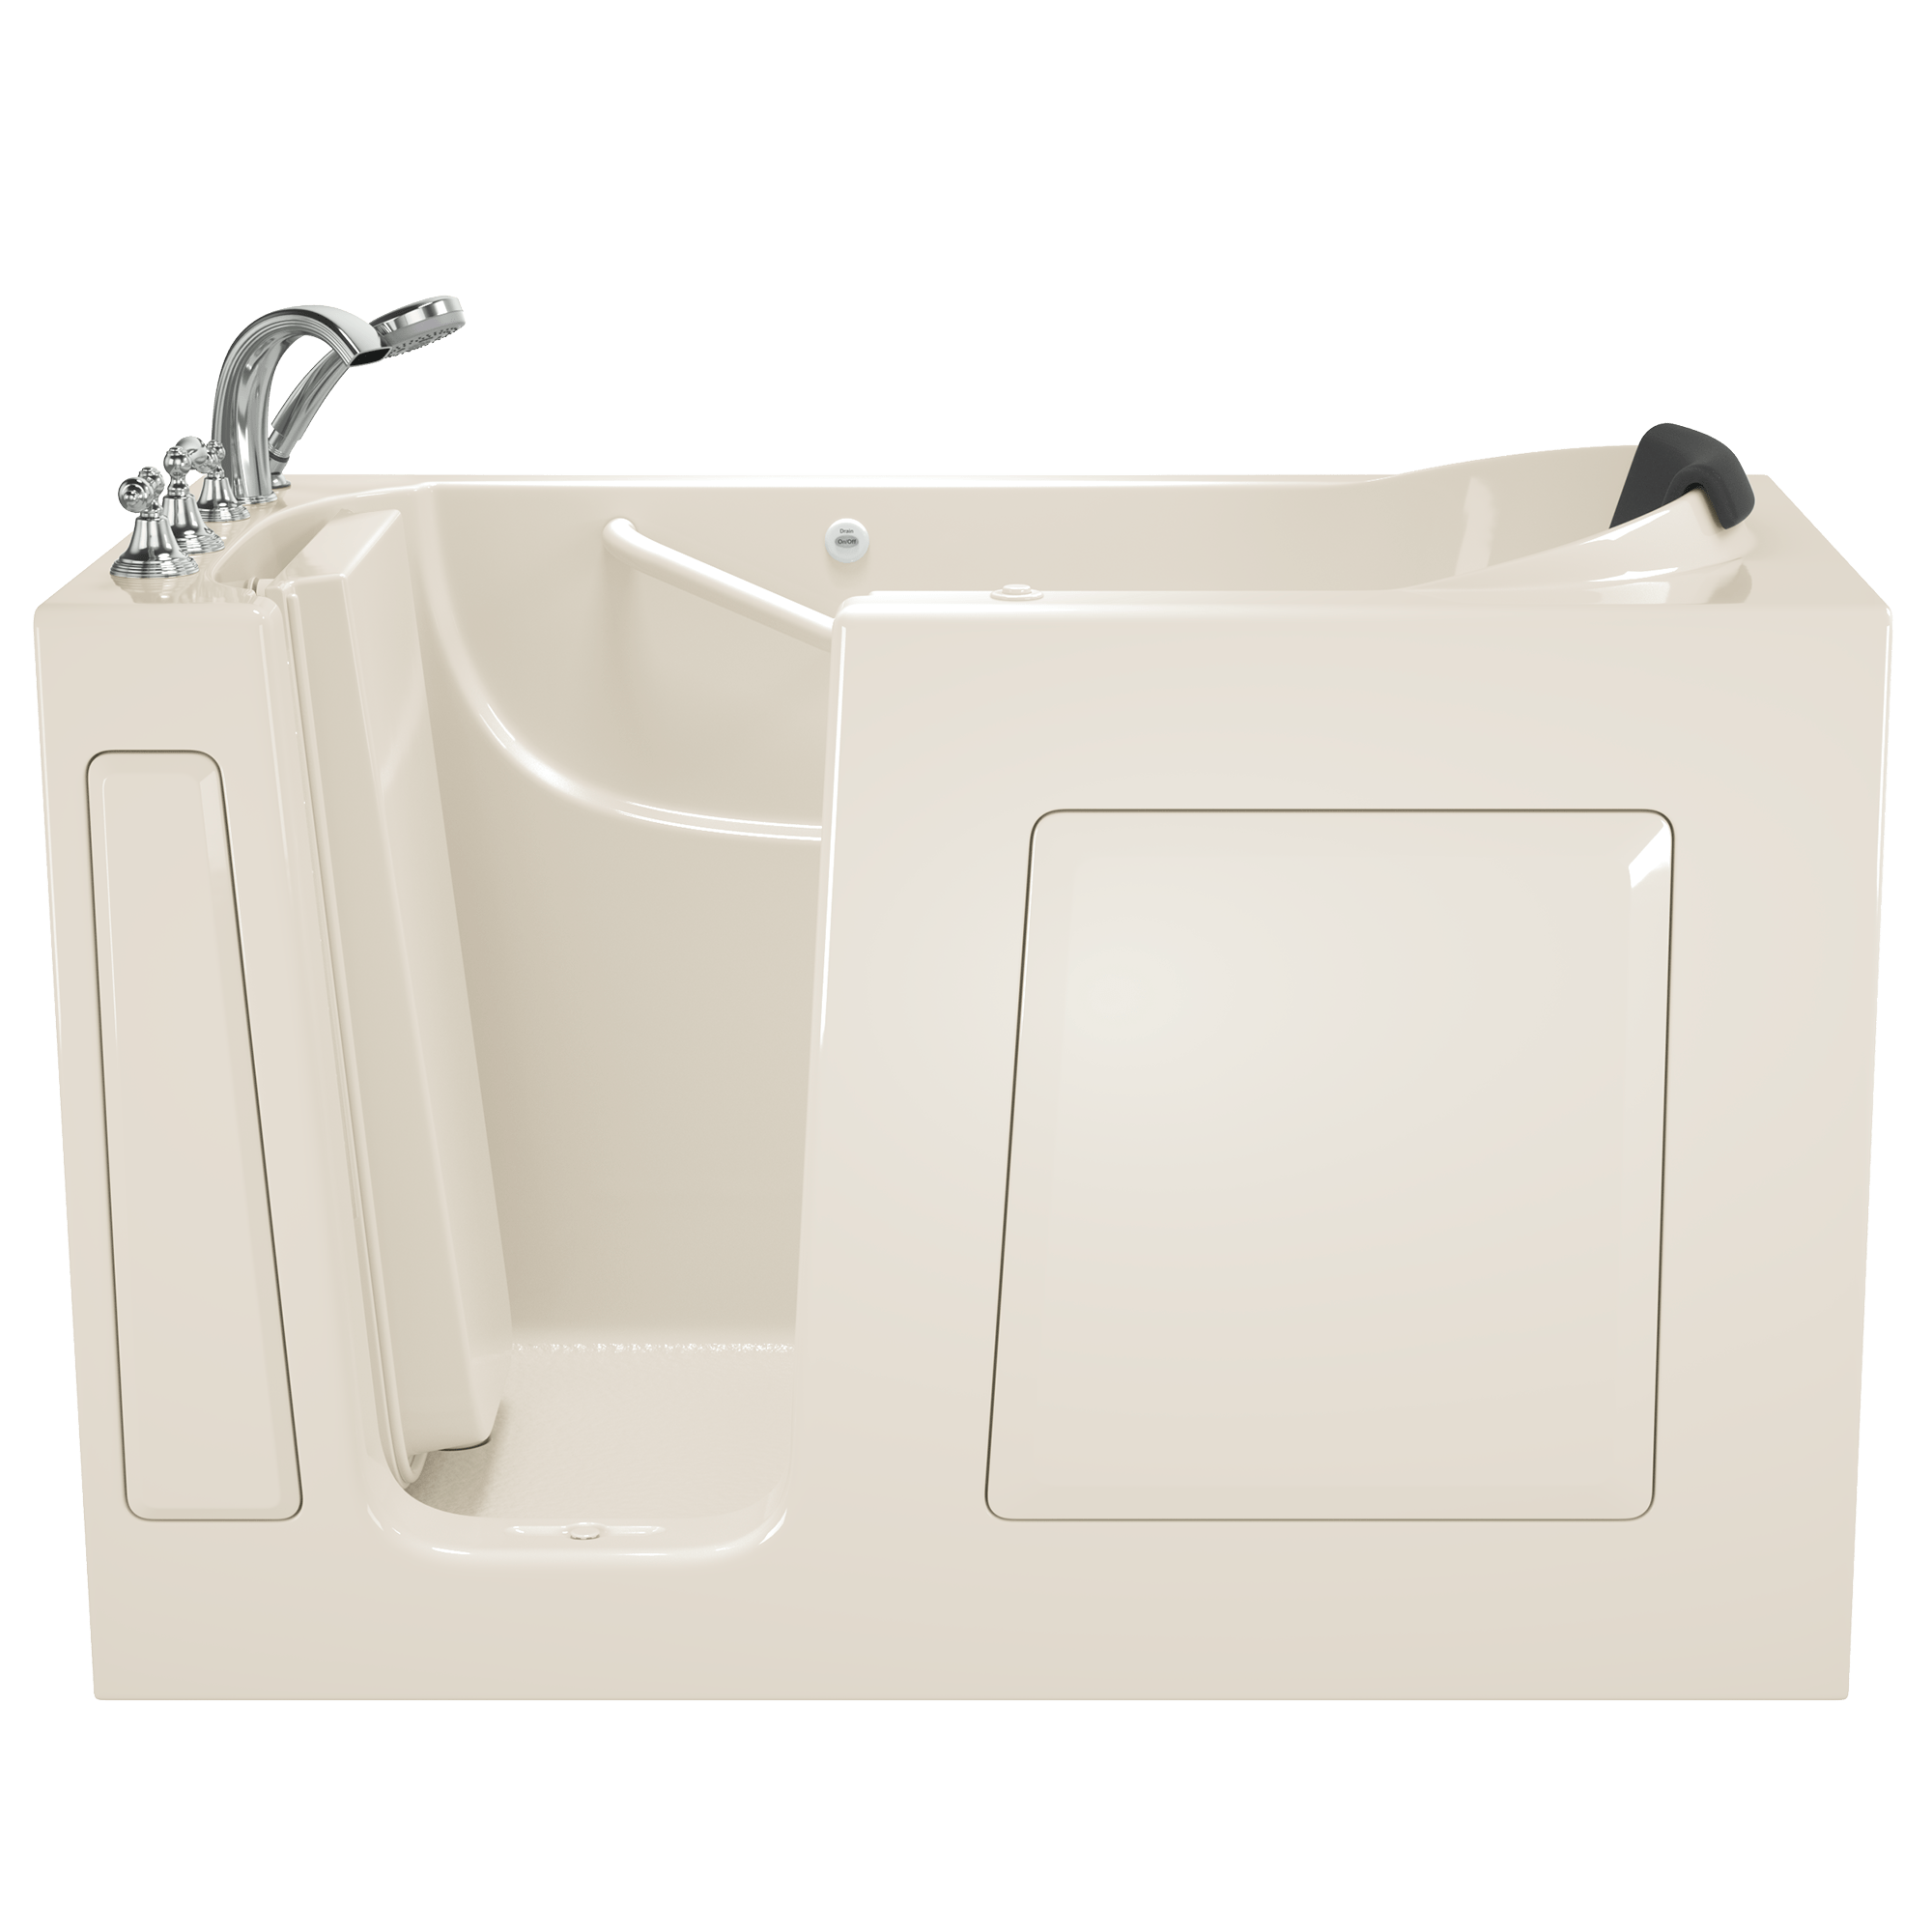 Gelcoat Premium Series 30 x 60  Inch Walk in Tub With Whirlpool System   Left Hand Drain With Faucet WIB LINEN